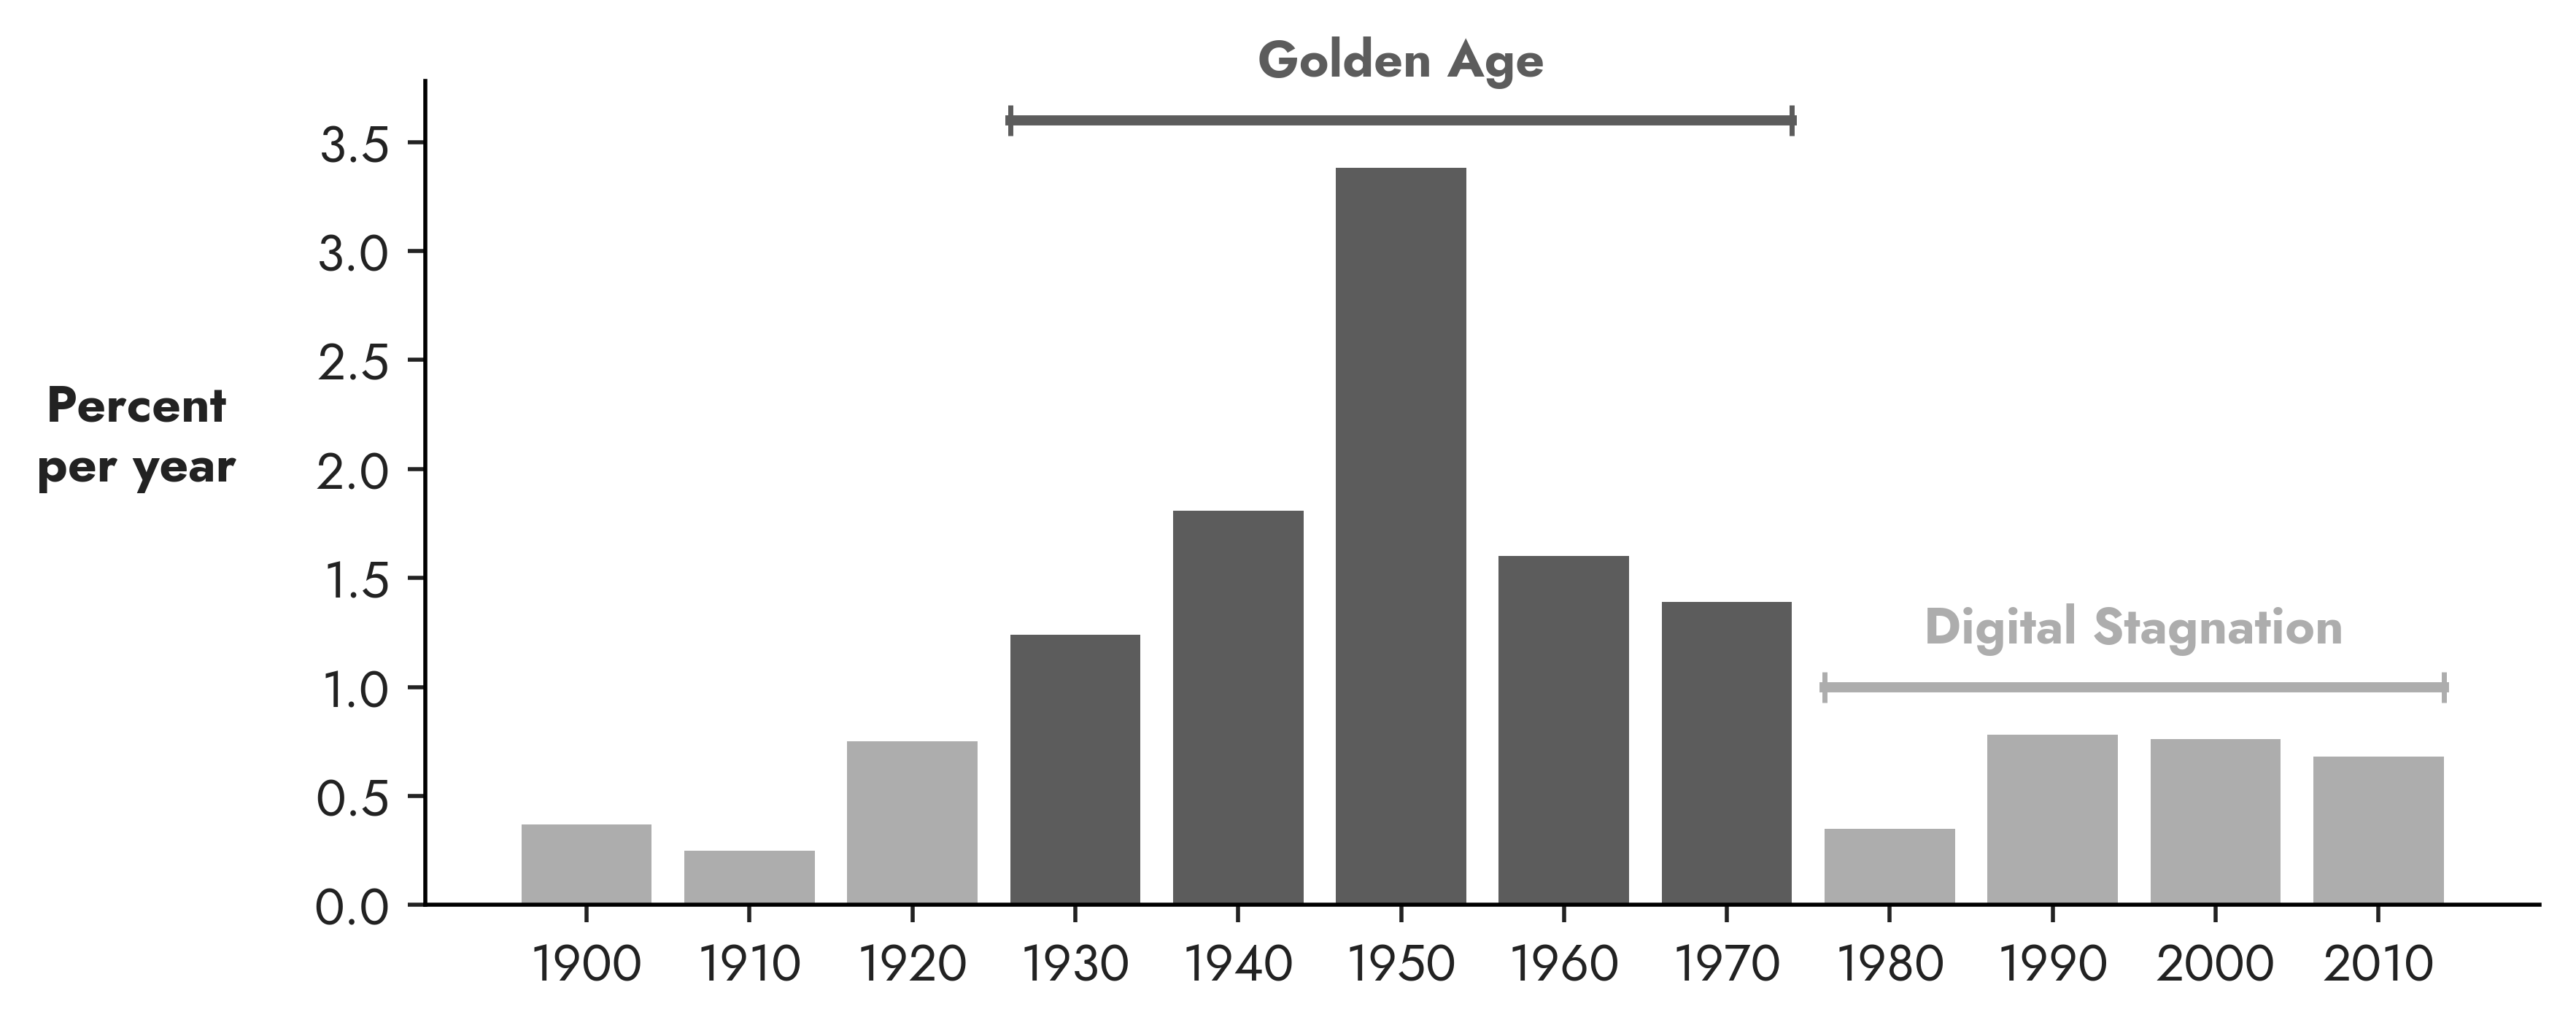 Shows the far higher rate of Total Factor Productivity growth during the Golden Age of American economic growth from the 1920s to the 1970s than before and after.